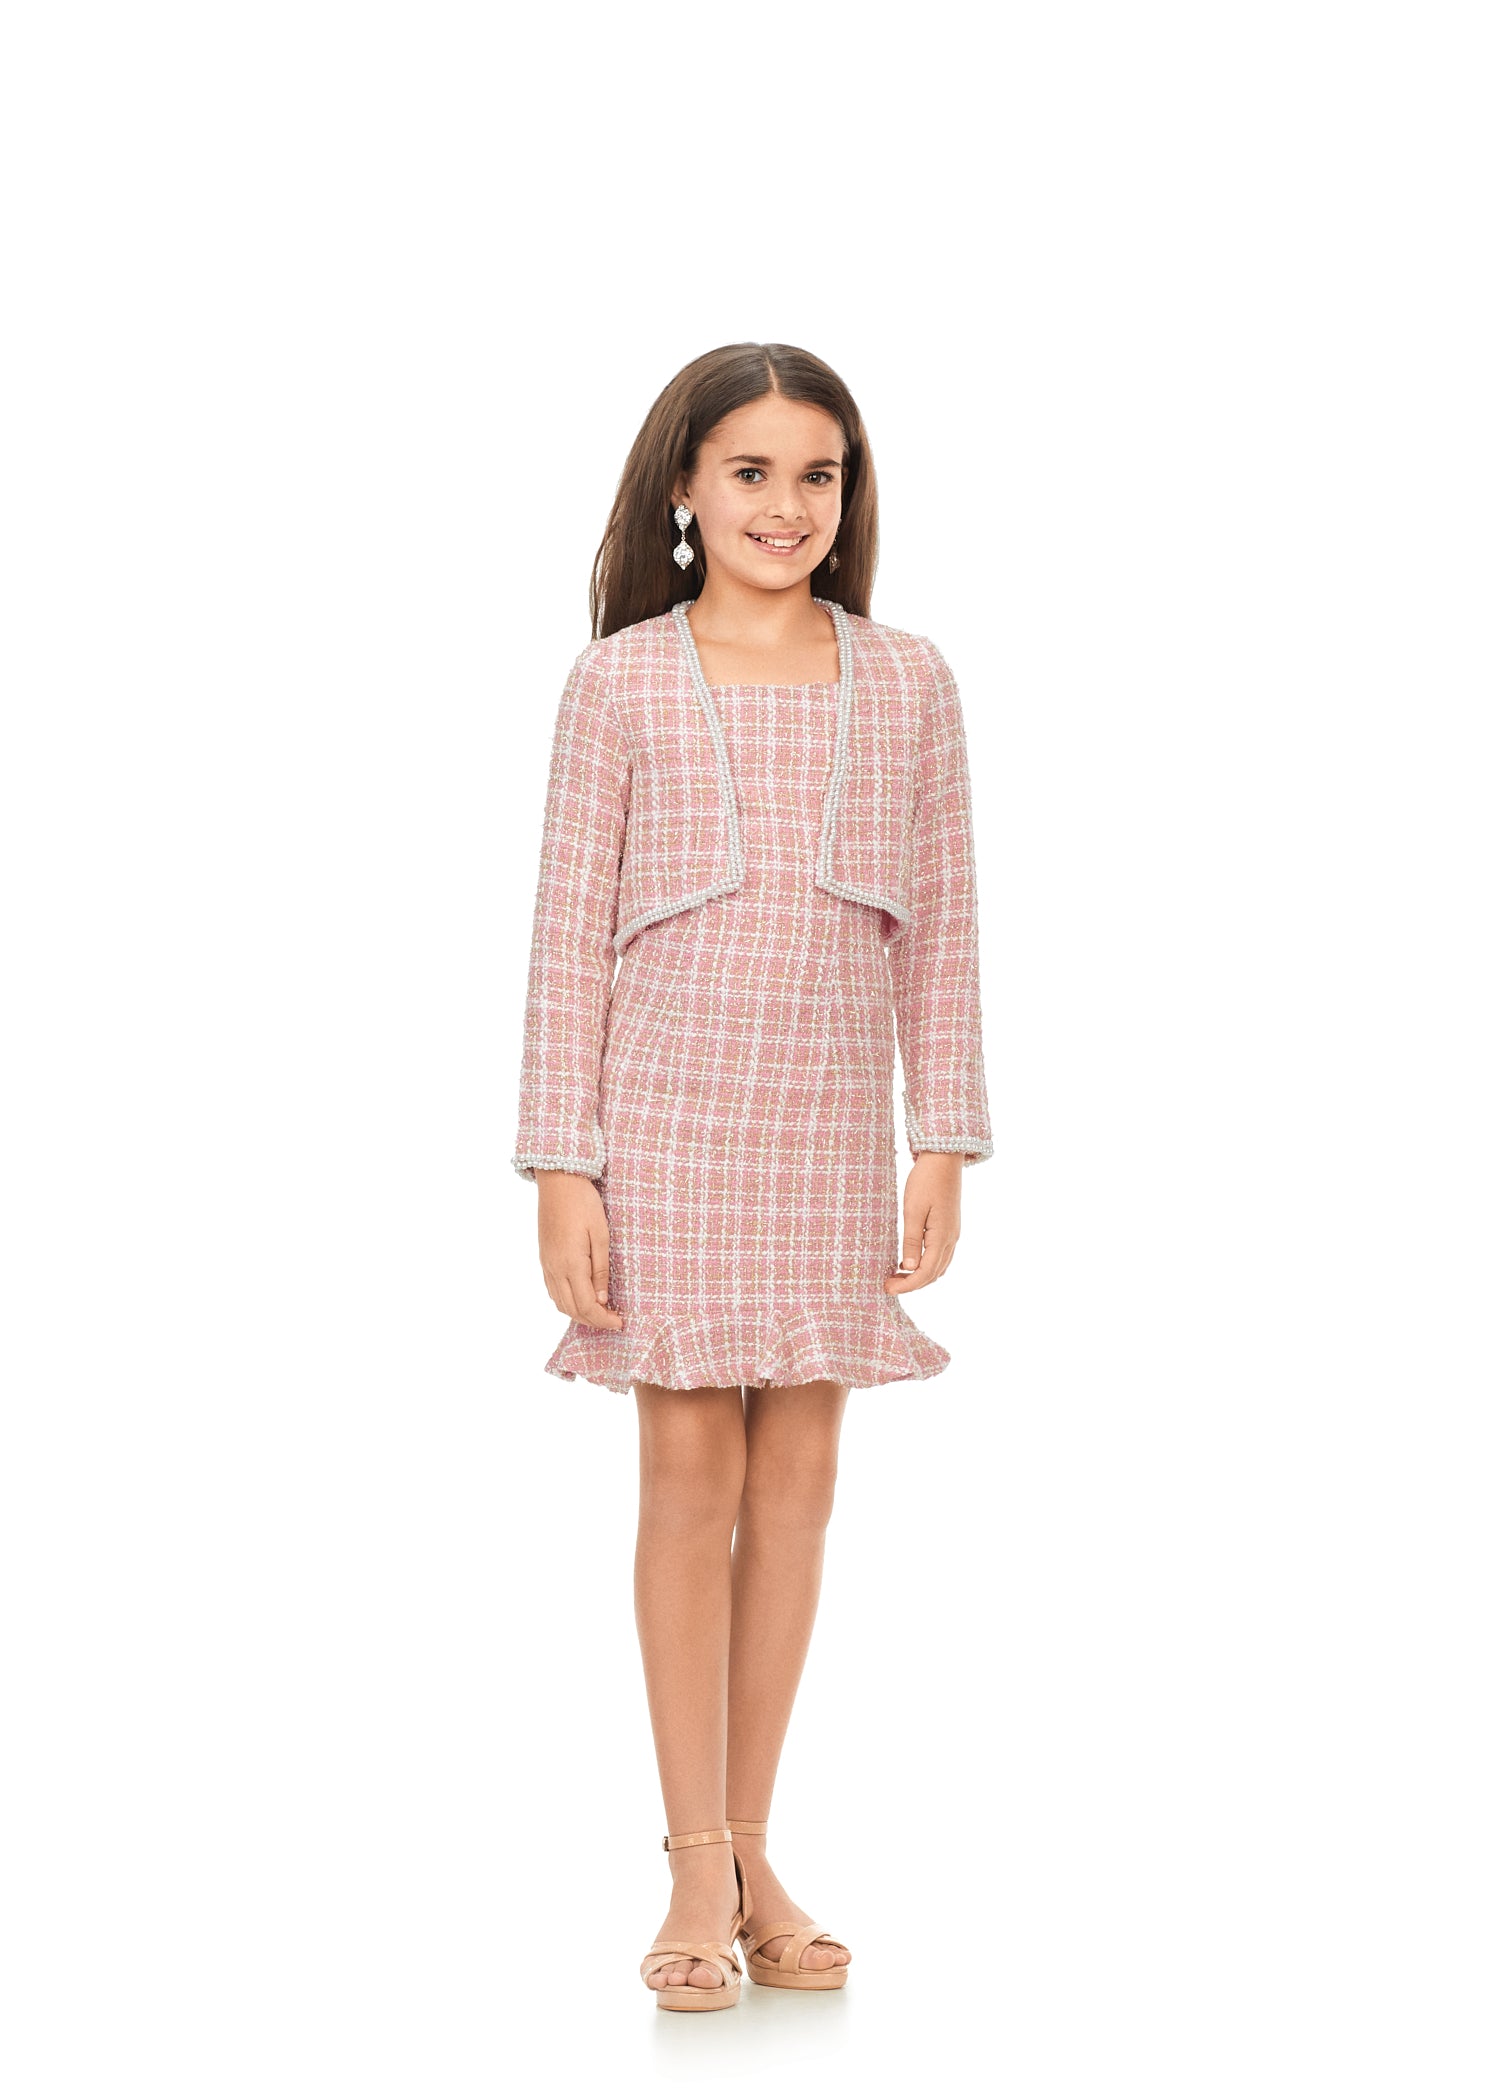 Ashley Lauren 8173 Kids Pink Tweed Cocktail Dress with Jacket  This gorgeous tweed dress features a crew neckline with fitted skirt. The skirt is complete with a ruffle hemline. The stunning jacket is trimmed in pearls to complete the look.